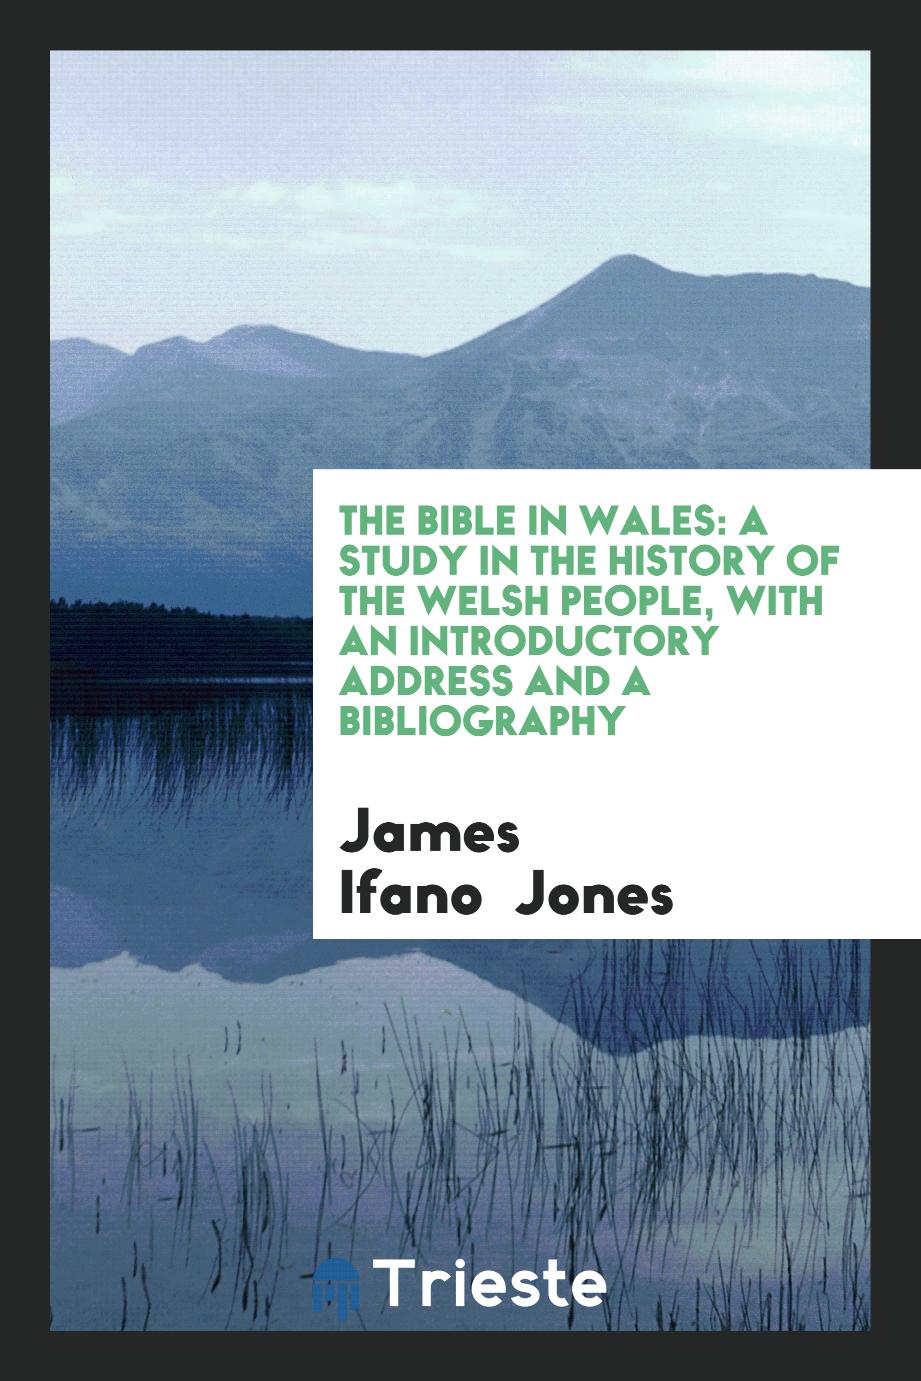 The Bible in Wales: A Study in the History of the Welsh People, with an Introductory Address and a Bibliography